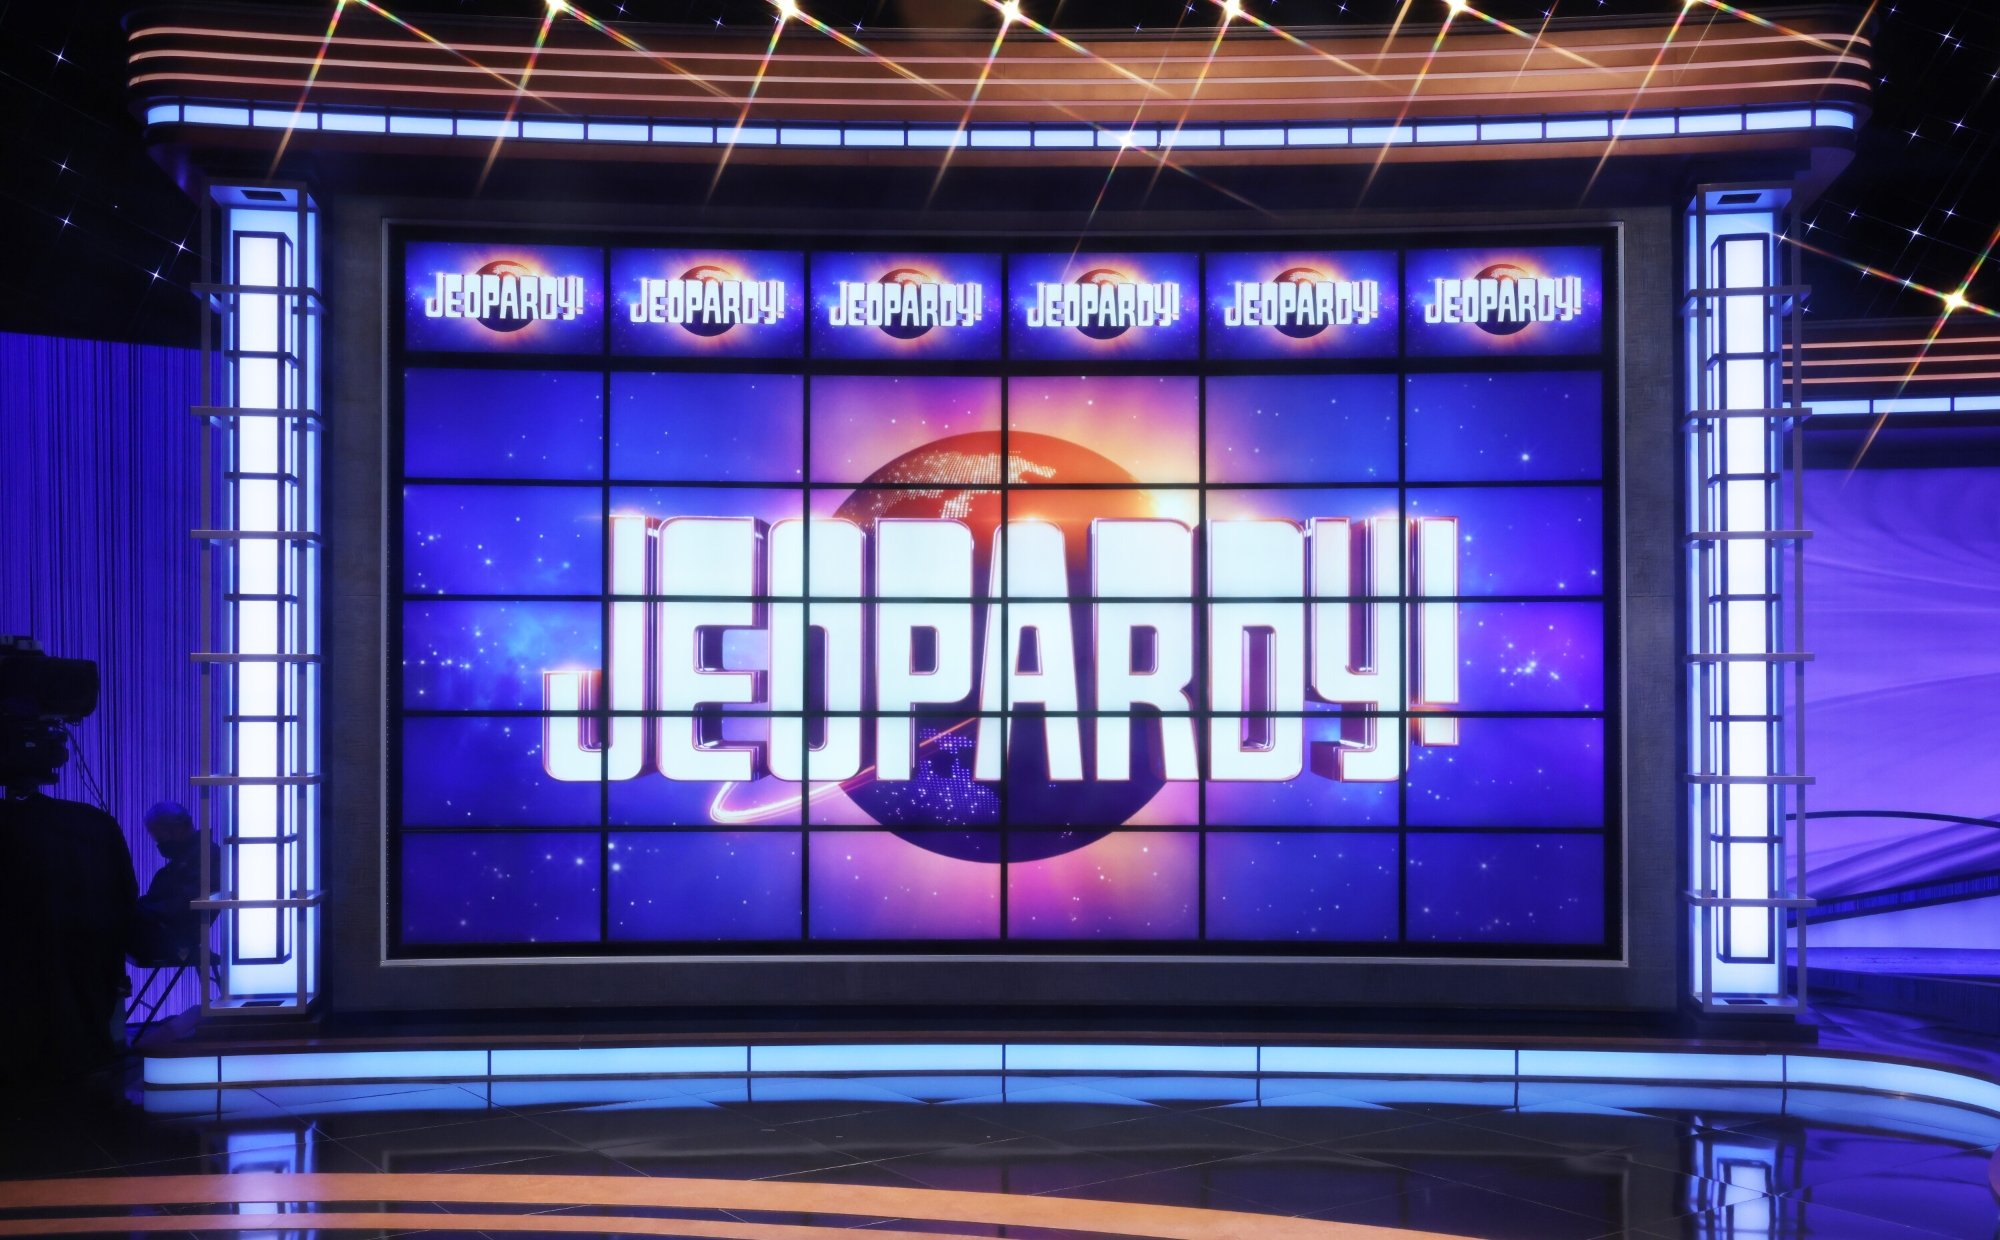 'Jeopardy!' Season 39, where 'Current Slang' category came up. The game board with the 'Jeopardy!' title on it.